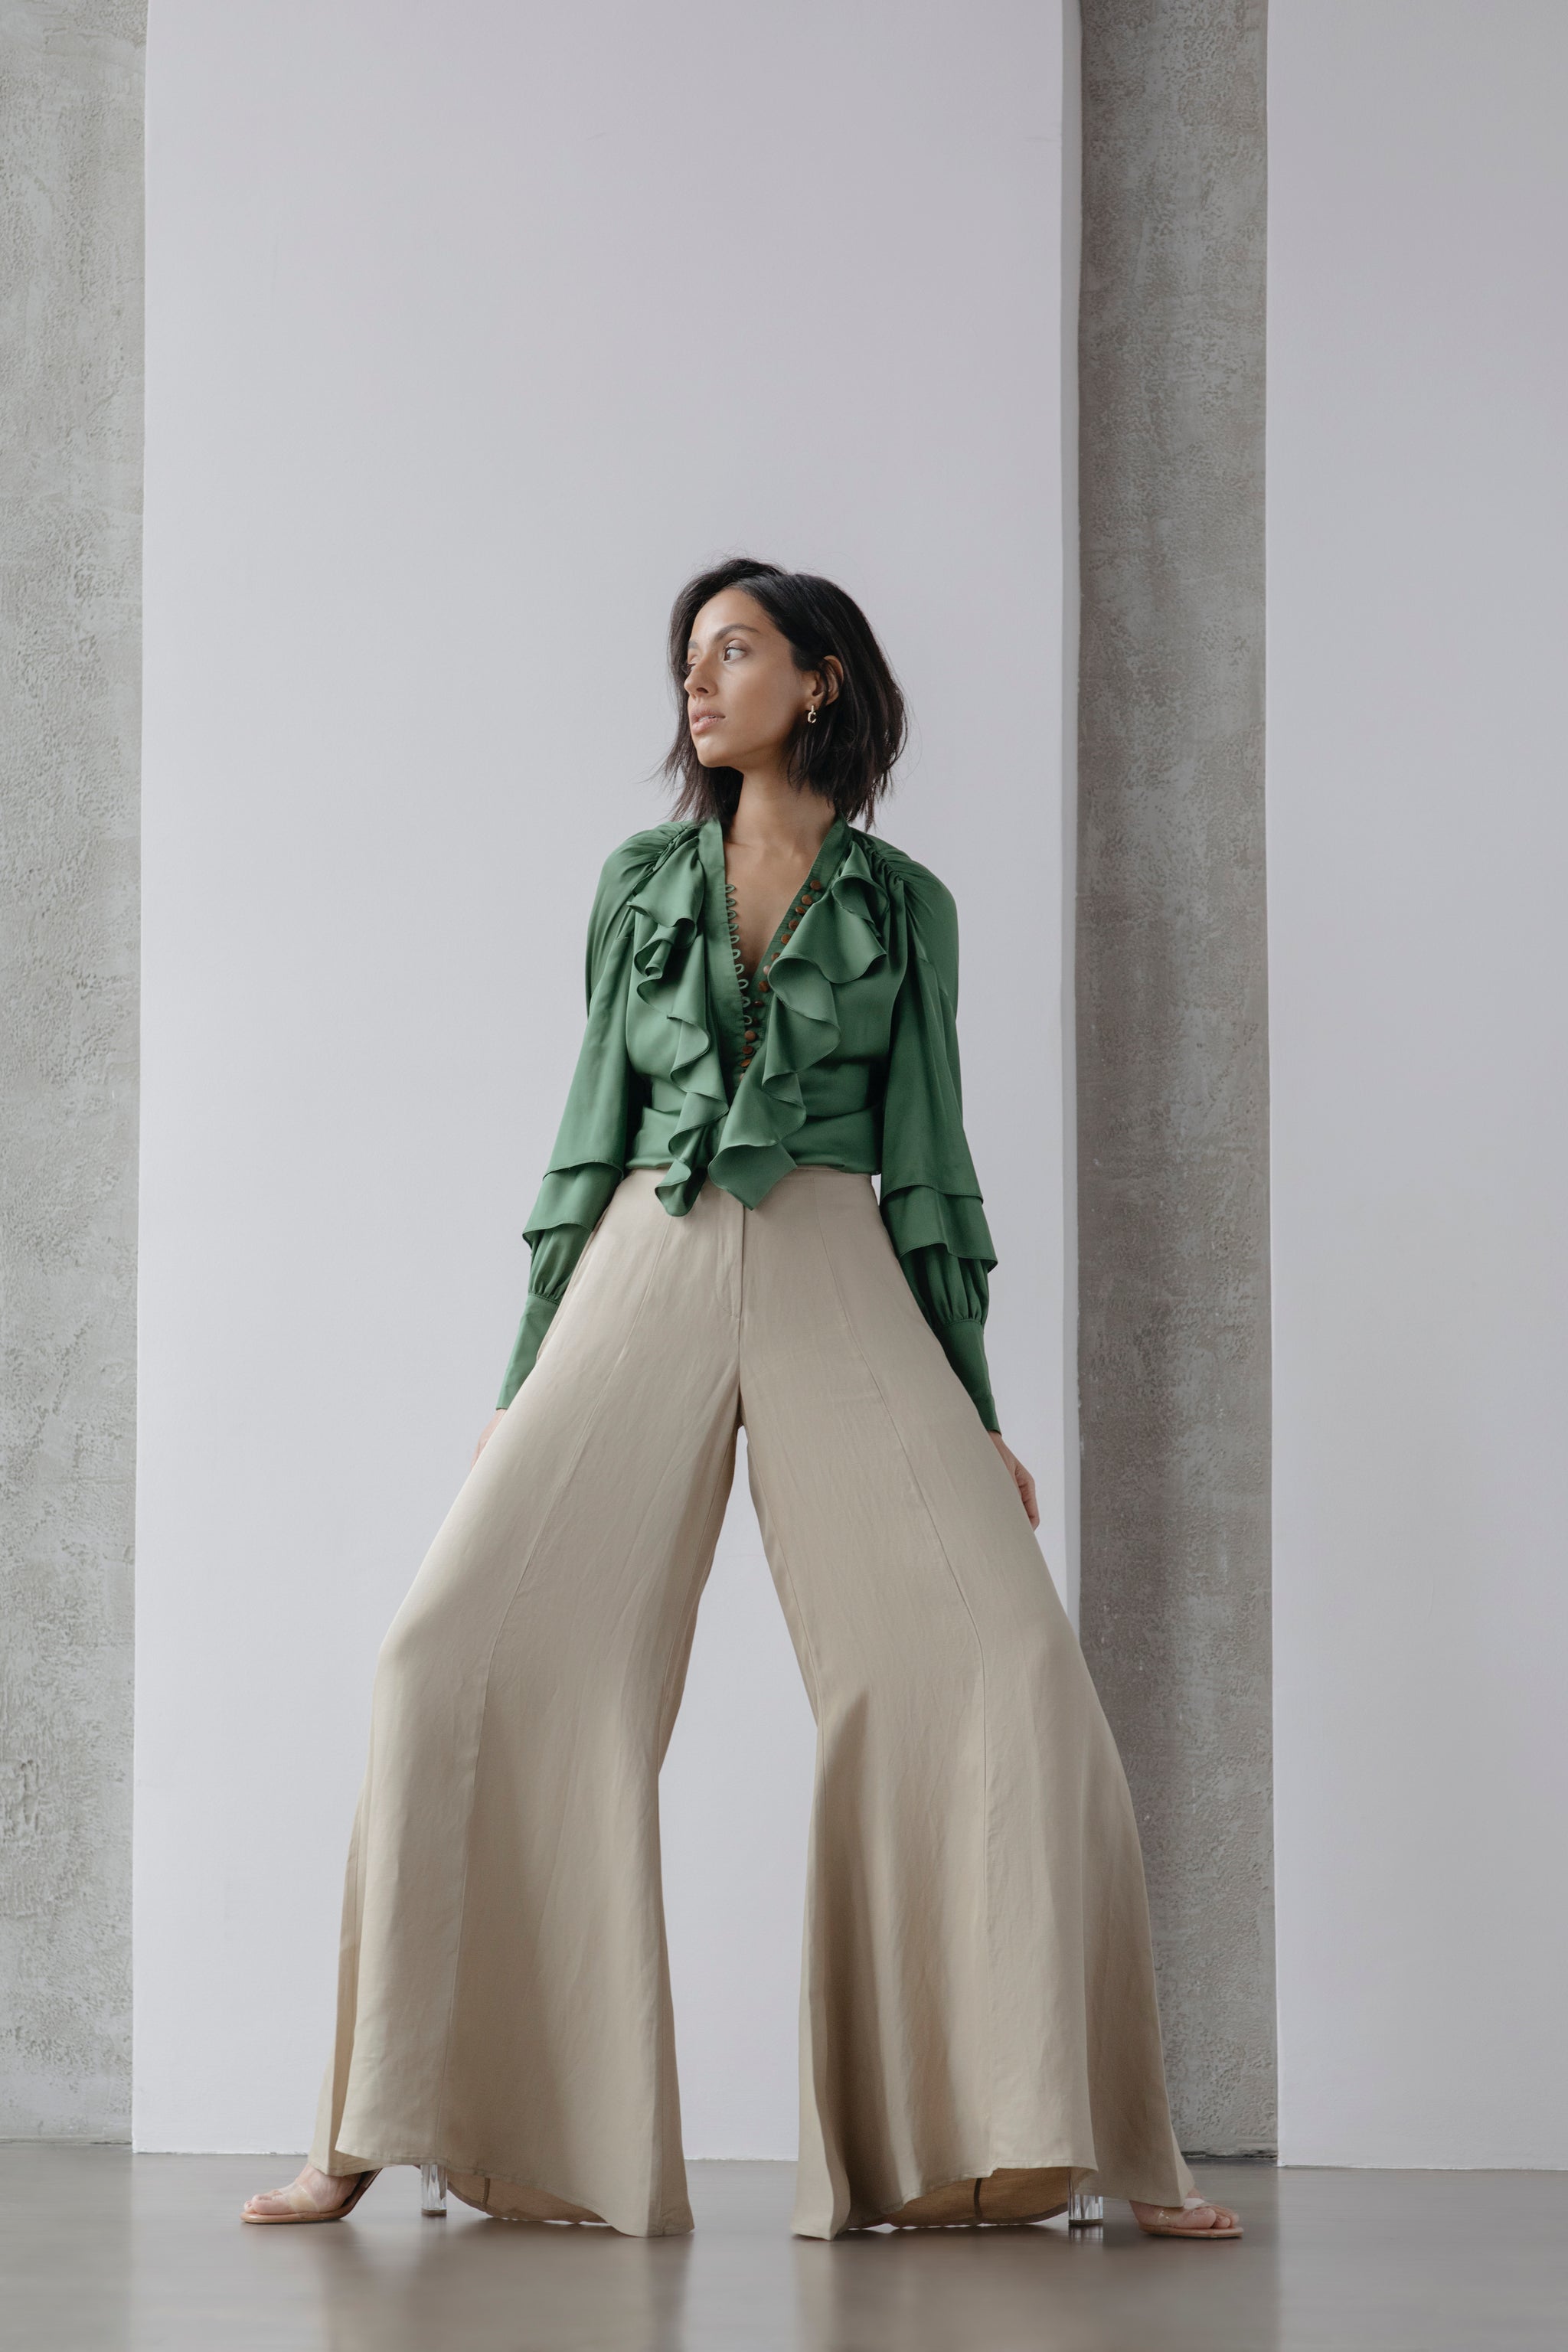 What are palazzo pants? When and where would you wear them? - Quora